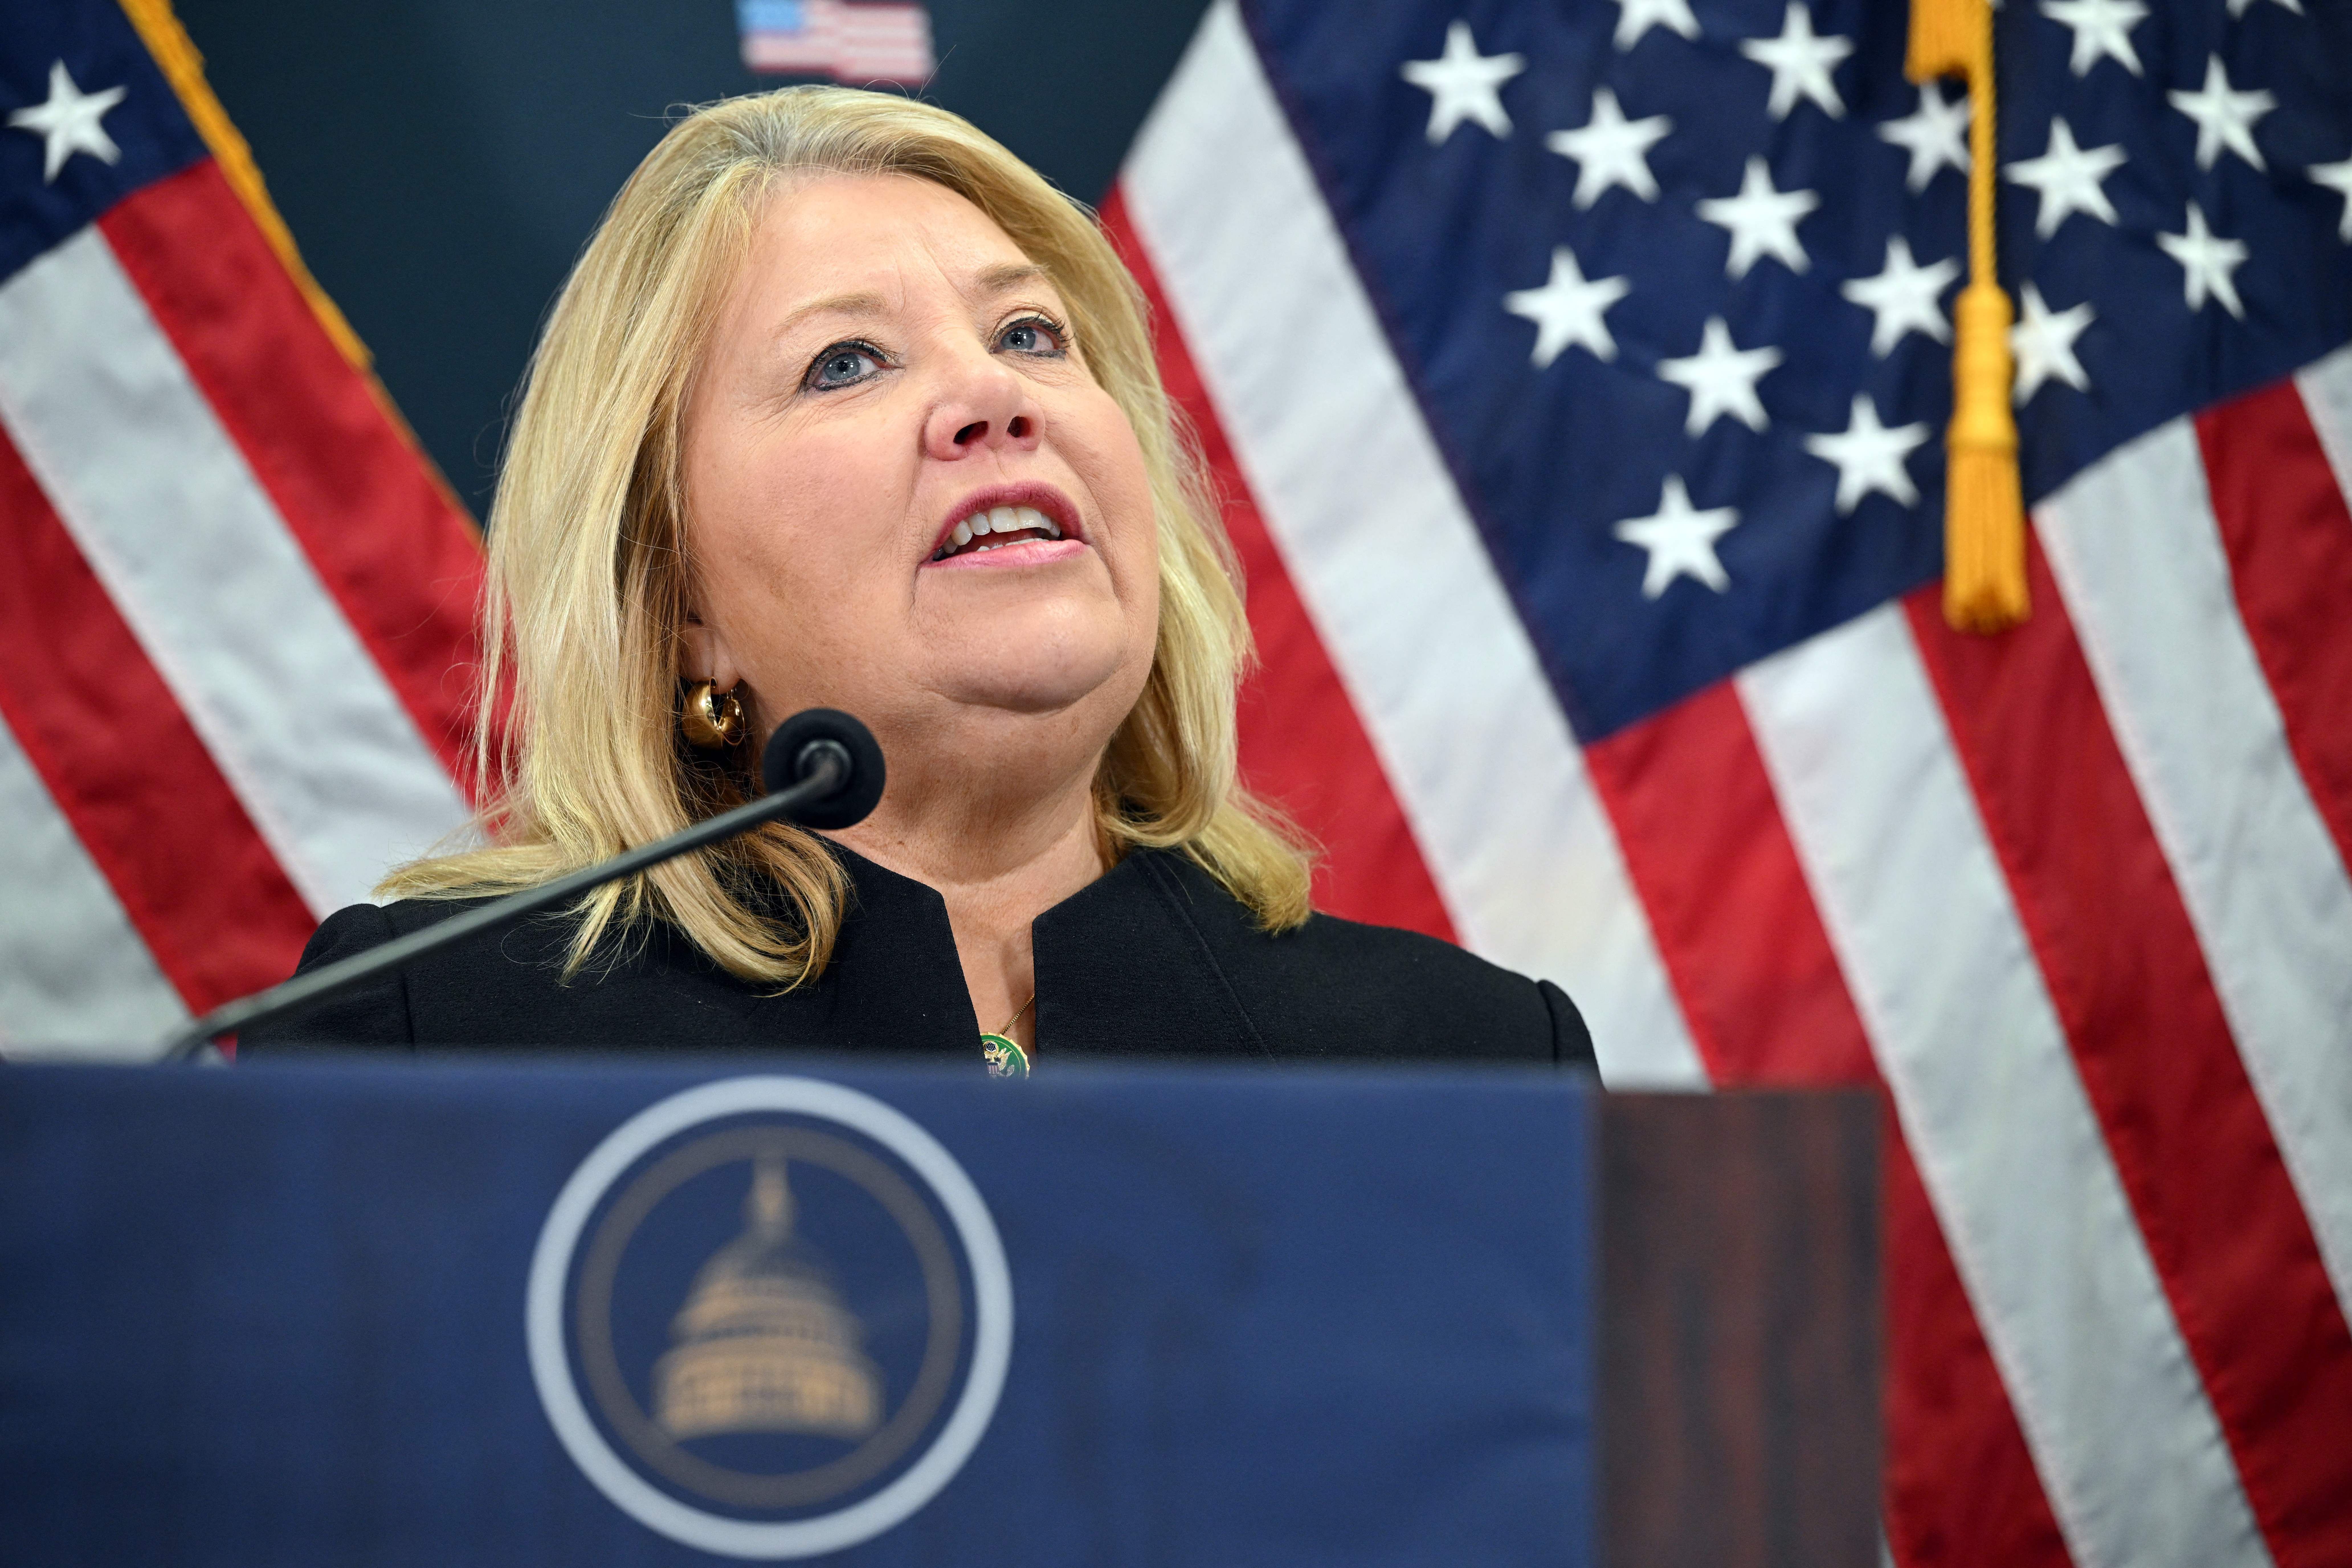 Member of the House Republican leadership Representative Debbie Lesko speaks at a press conference on Capitol Hill in Washington, DC, June 6, 2023. (Photo by Mandel NGAN / AFP) (Photo by MANDEL NGAN/AFP via Getty Images)